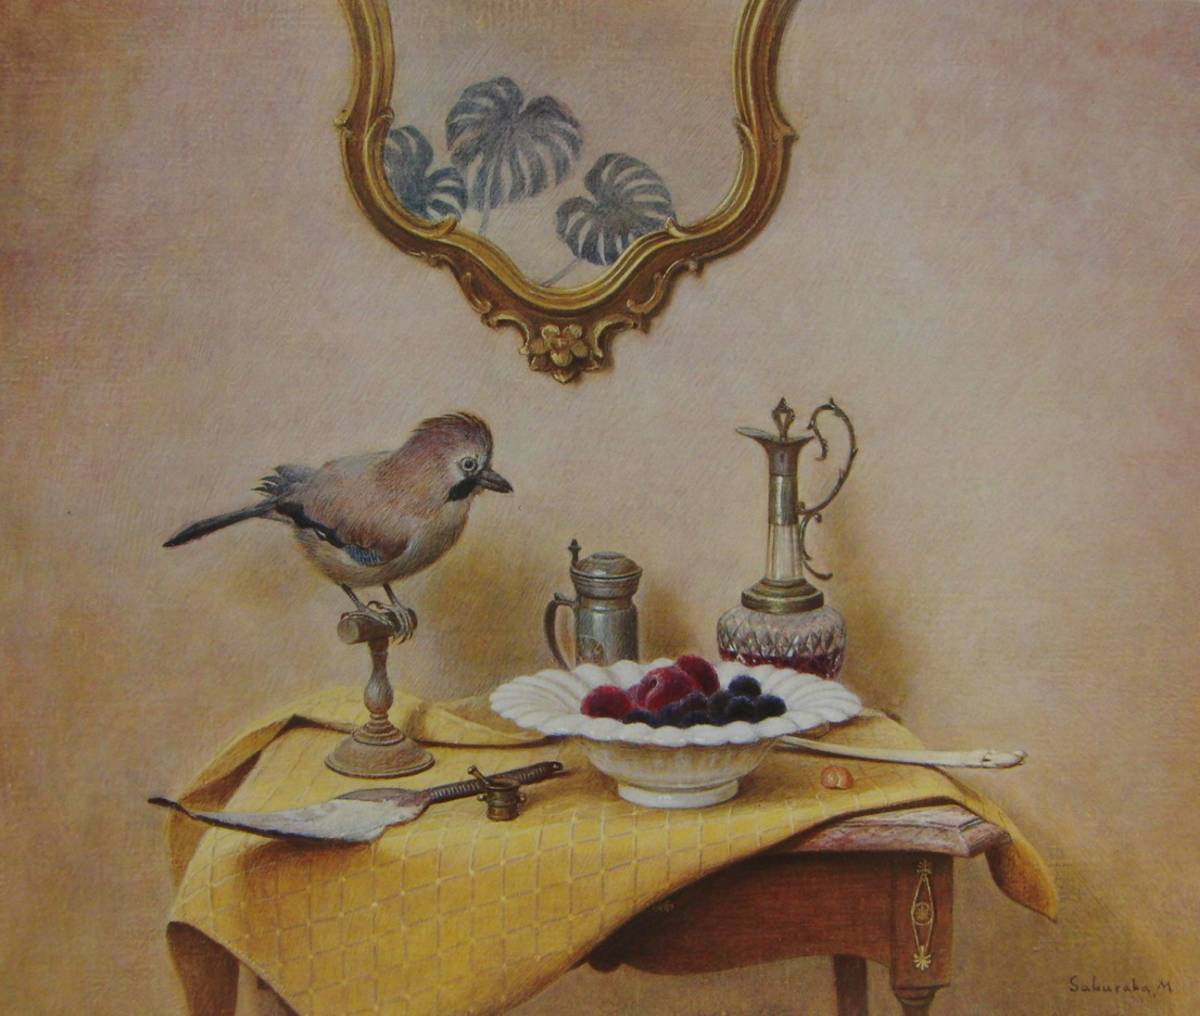 Yu Sakuraba, bird and fruit, Rare art books/framed paintings, Brand new high quality frame with frame, Good condition, free shipping, painting, oil painting, Nature, Landscape painting